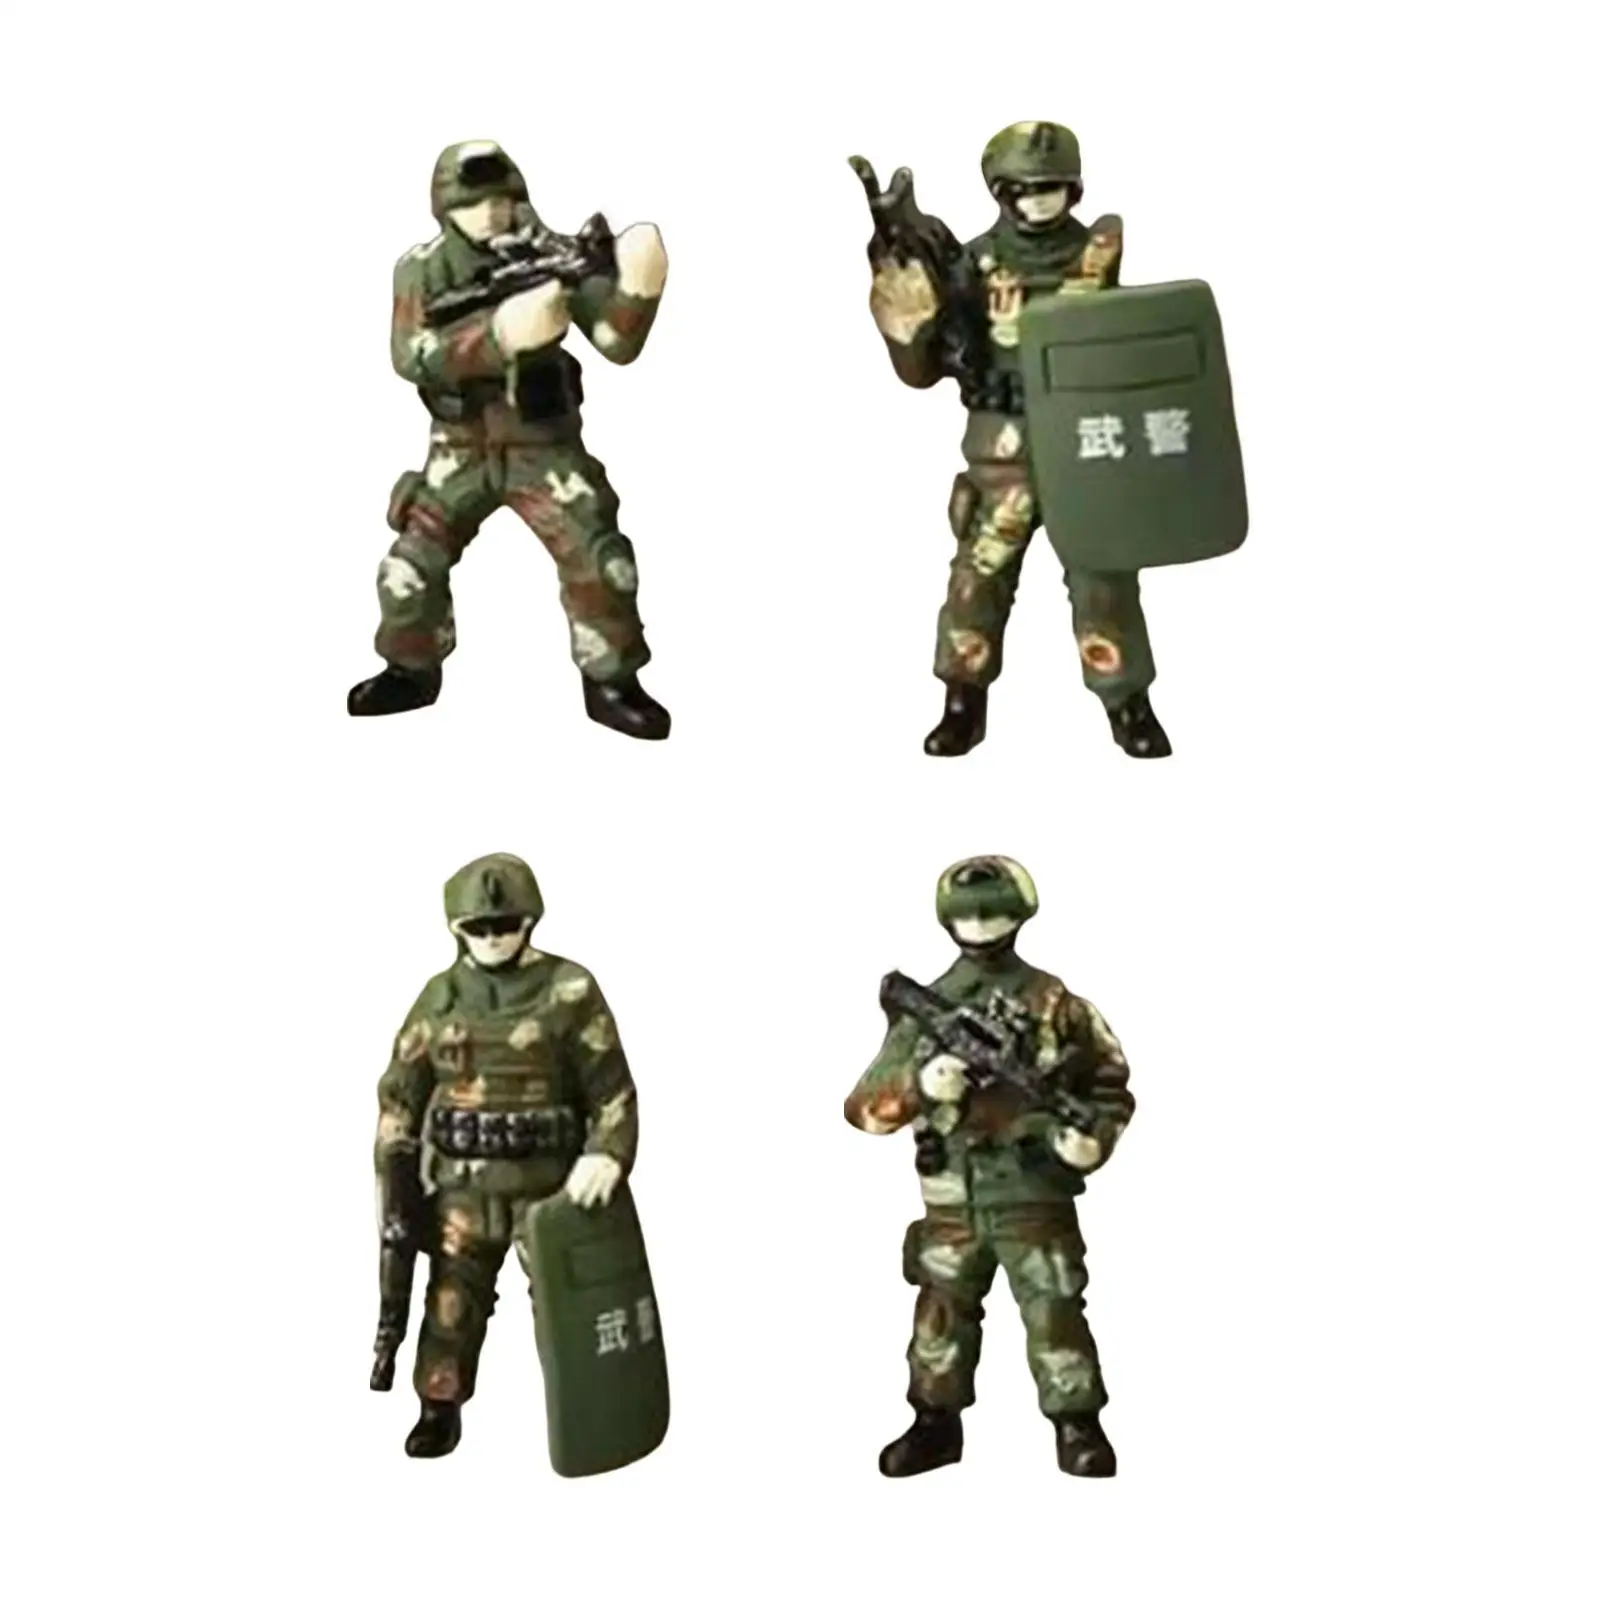 4 Pieces 1:64 Scale Tiny People Model Special Forces Model Figures Painted Action Figures Soldiers Toys for DIY Projects S Scale